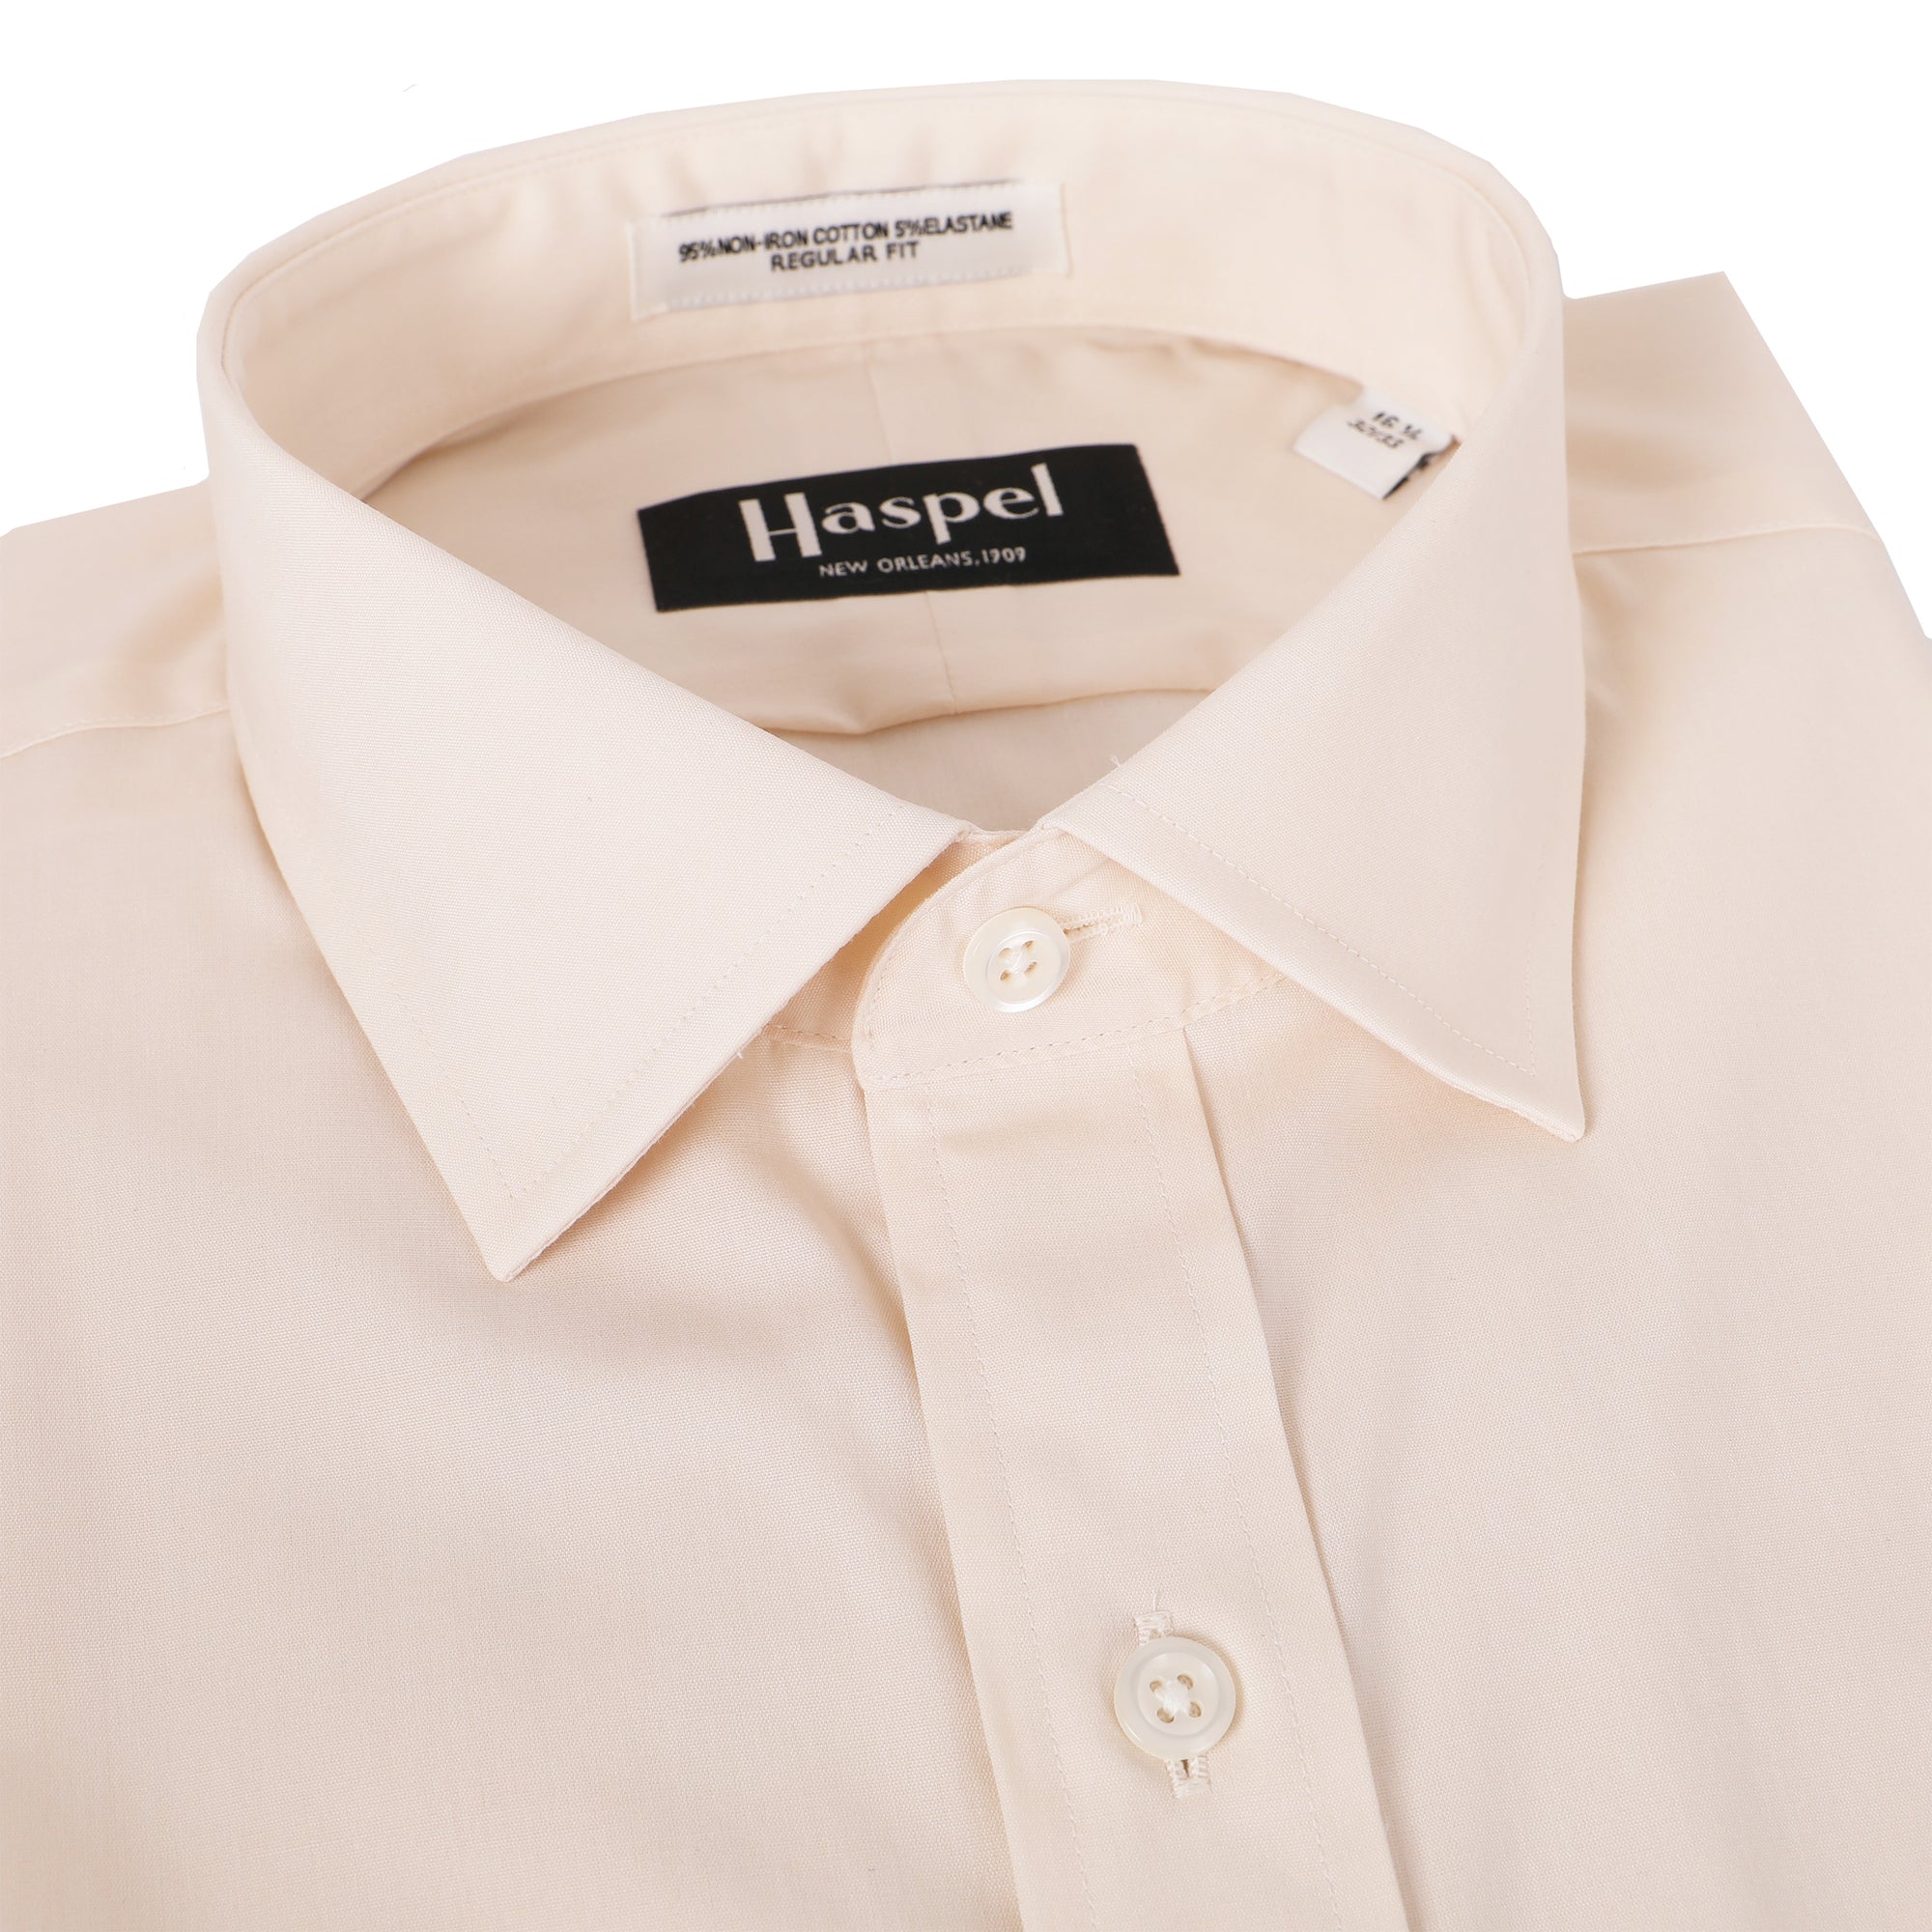 No hassle, only Haspel means no wasting time on multiple websites to complete your look. You can find all the classic men's dress shirts here that were carefully chosen to pair up with our unique, lightweight men's suits.  100% Imported Combed Cotton  •  80's 2-Ply/Non-Iron Pinpoint Fabric  •  Point Collar  •  Long Sleeve, Button Cuff